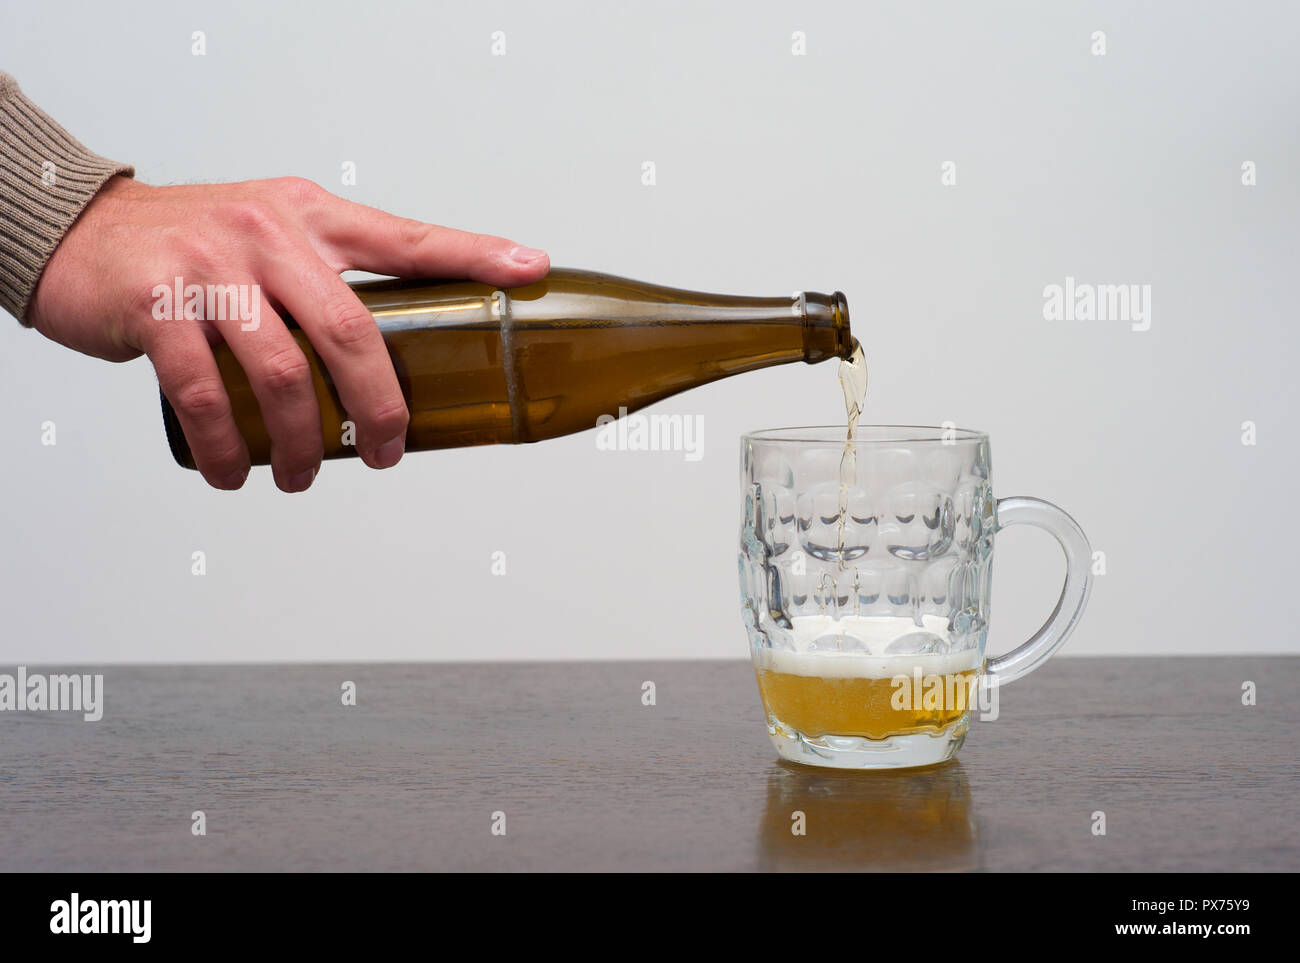 Filling a Pint of Blonde Beer from the Bottle, Hand Pouring Ale or Lager into a Tankard Stock Photo